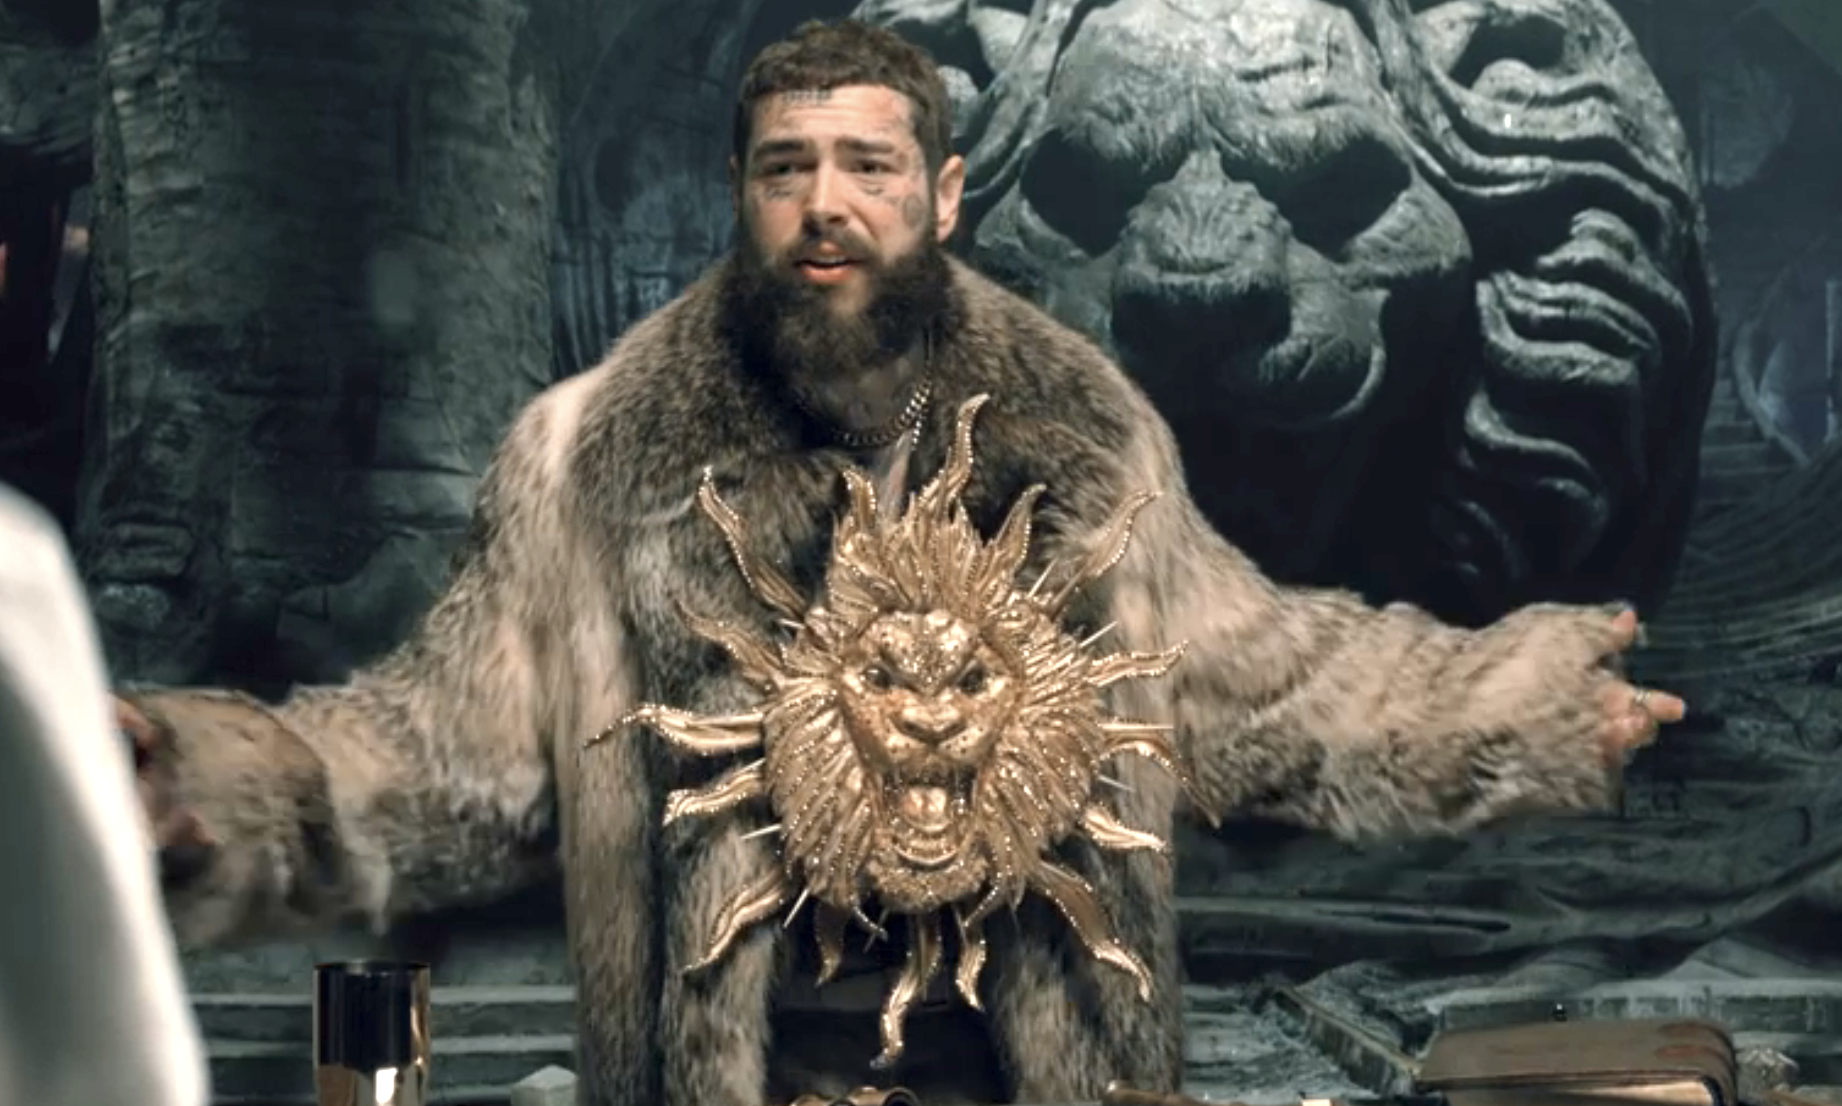 Post Malone in elaborate costume with a lion-faced chest piece, thick beard, and fur cloak, gesturing widely in a stone room